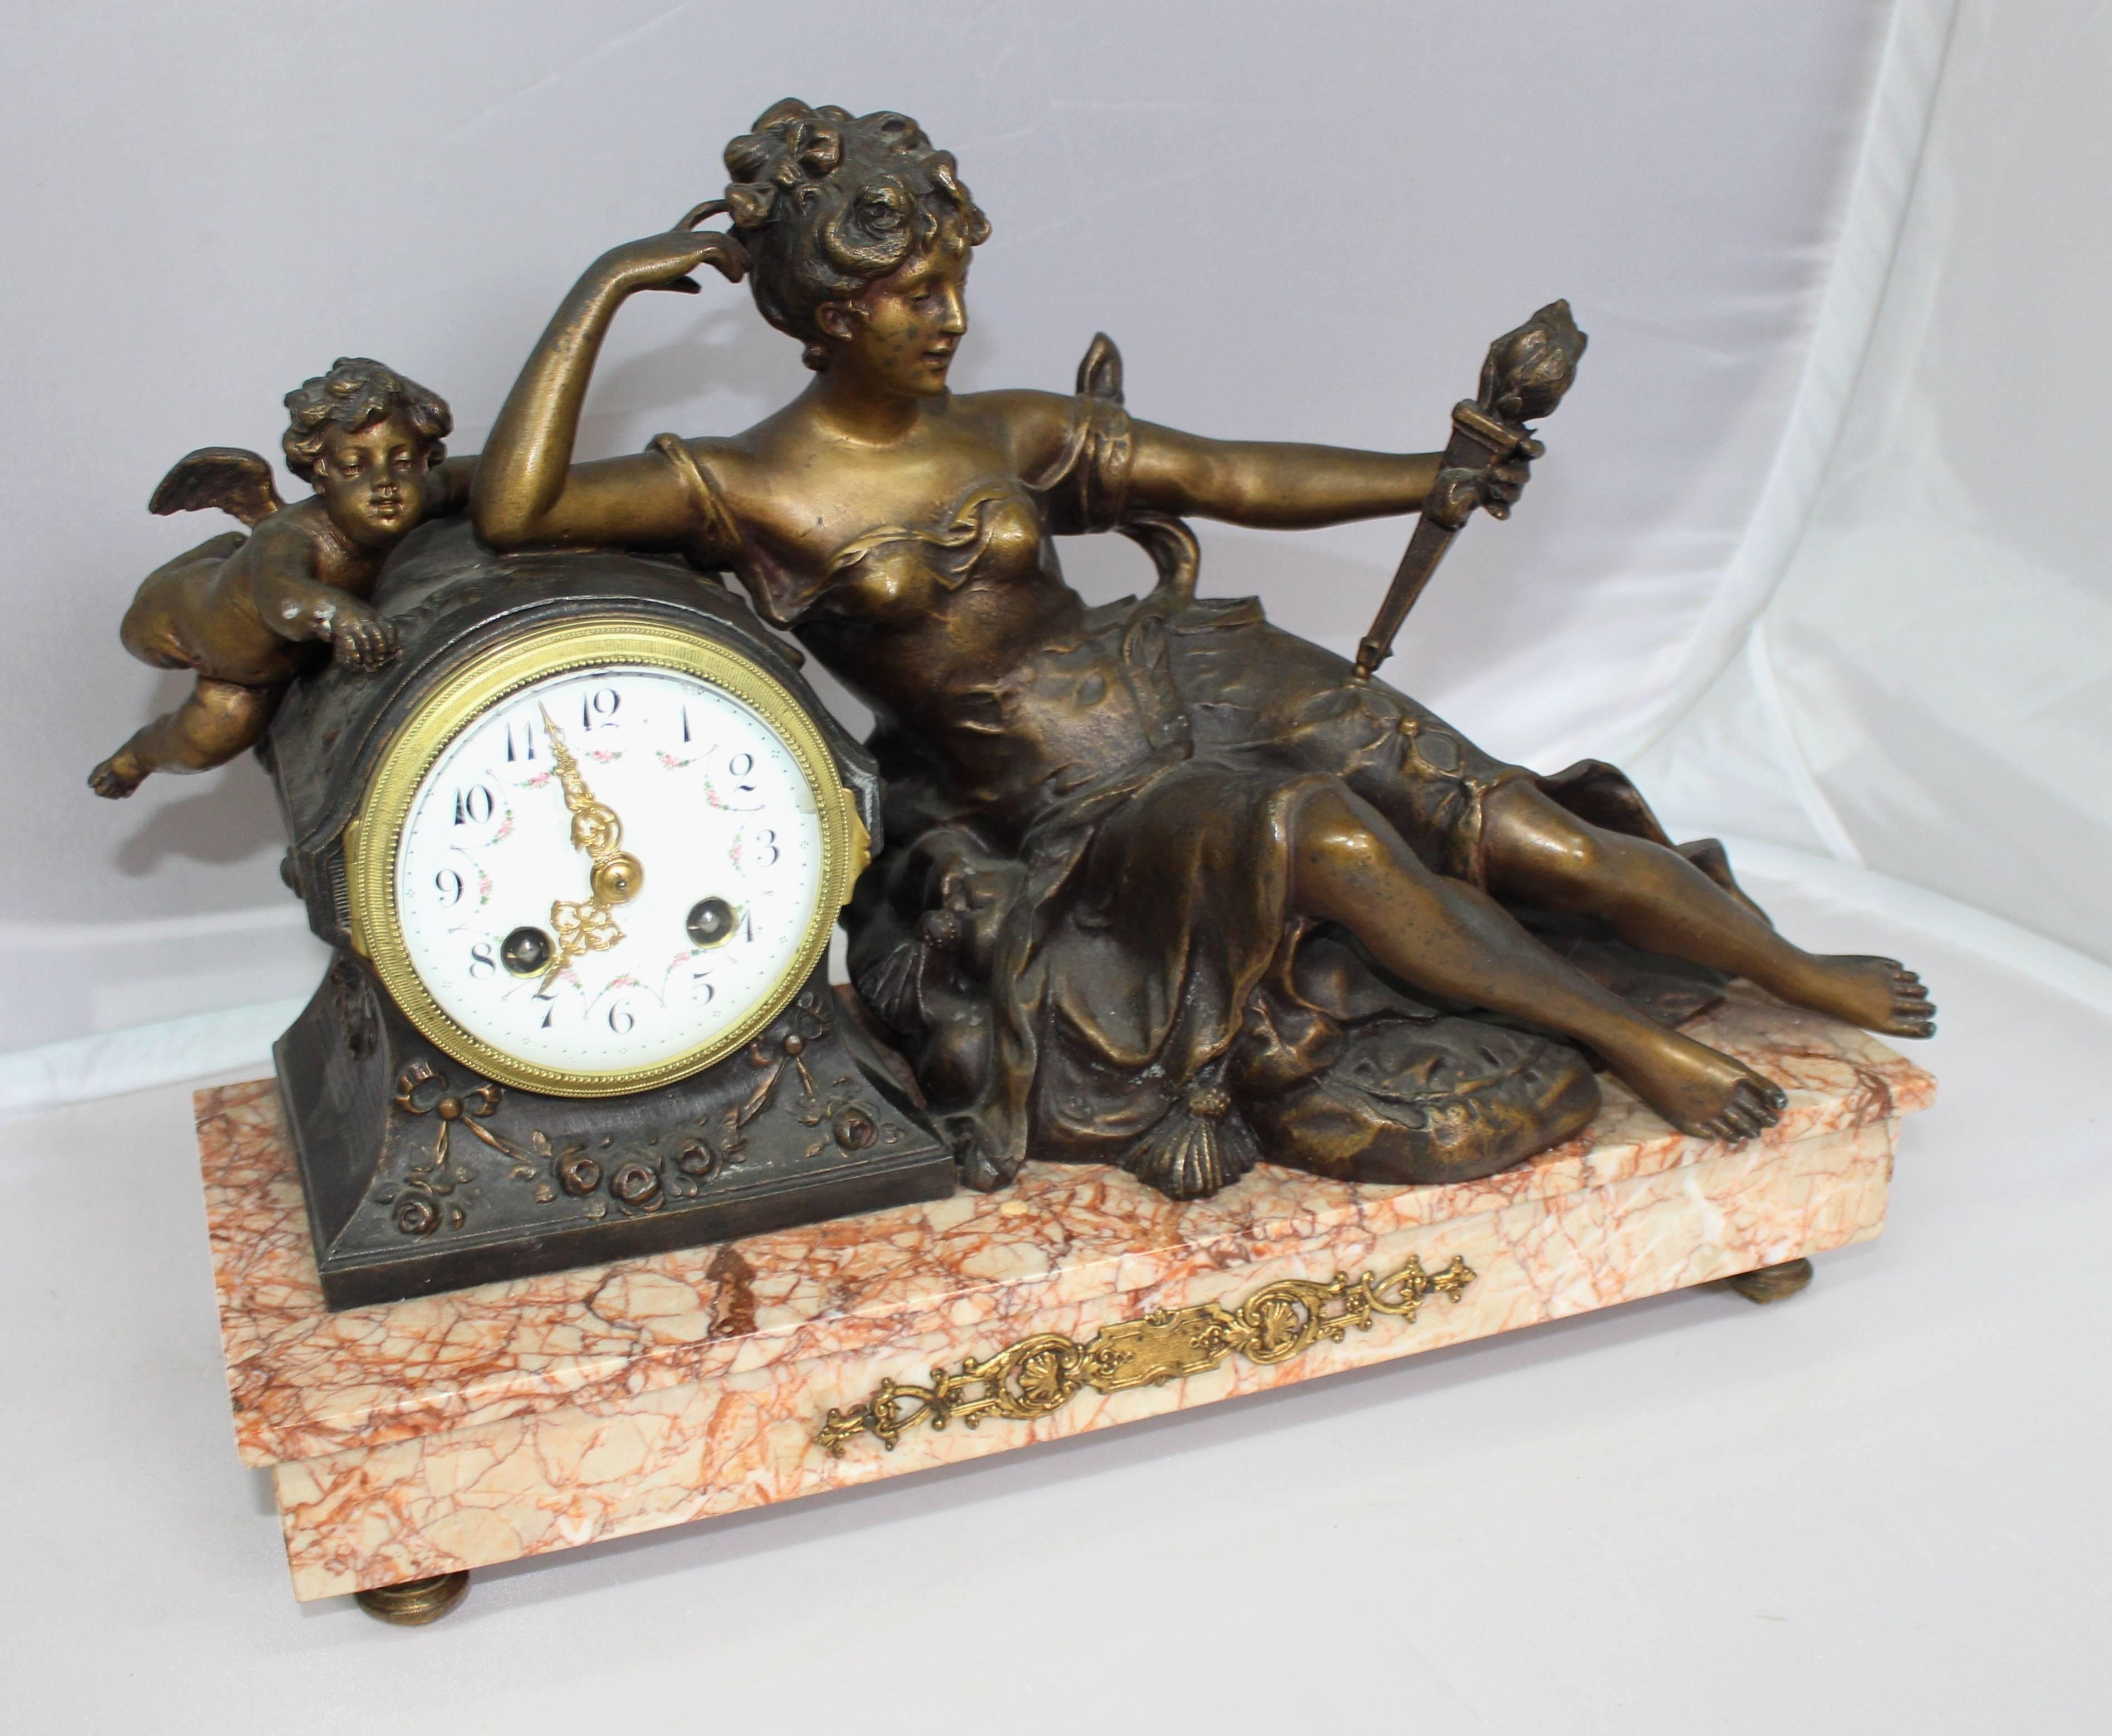 Period 
Late 19th century.

Dial 
enamel dial with painted floral decoration and Arabic numerals, brass hands, two winding holes, brass outer ring

Decoration 
spelter figures abover a rouge marble base with ormolu mounts and feet

Movement